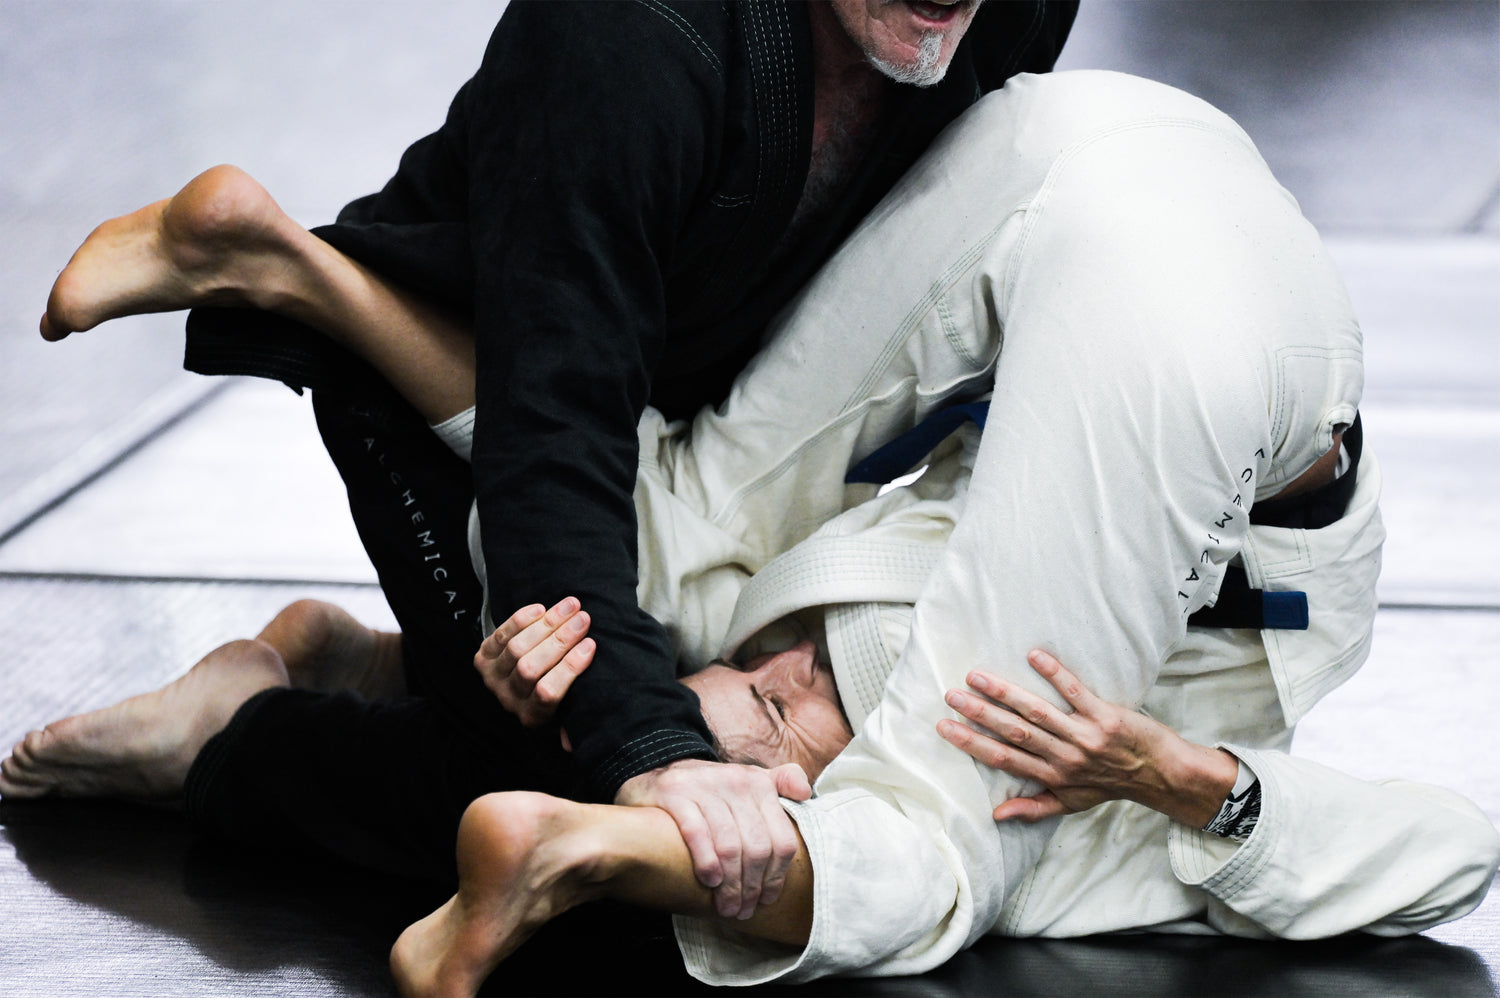 Two men rolling. One appears to be winning. Perhaps he is applying a relaxed approach to his grappling.